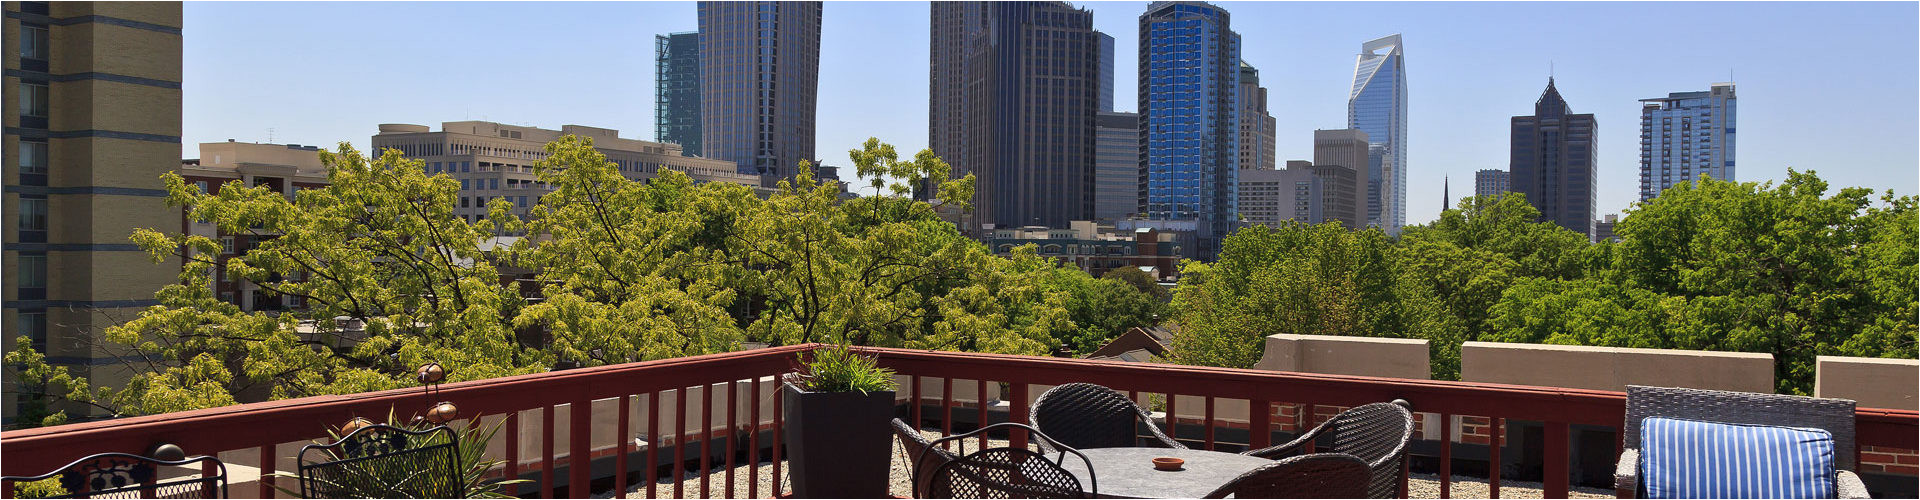 Providence Park Apartment Homes Charlotte Nc Here are the Best Places to Live if You Re Moving to Charlotte Nc